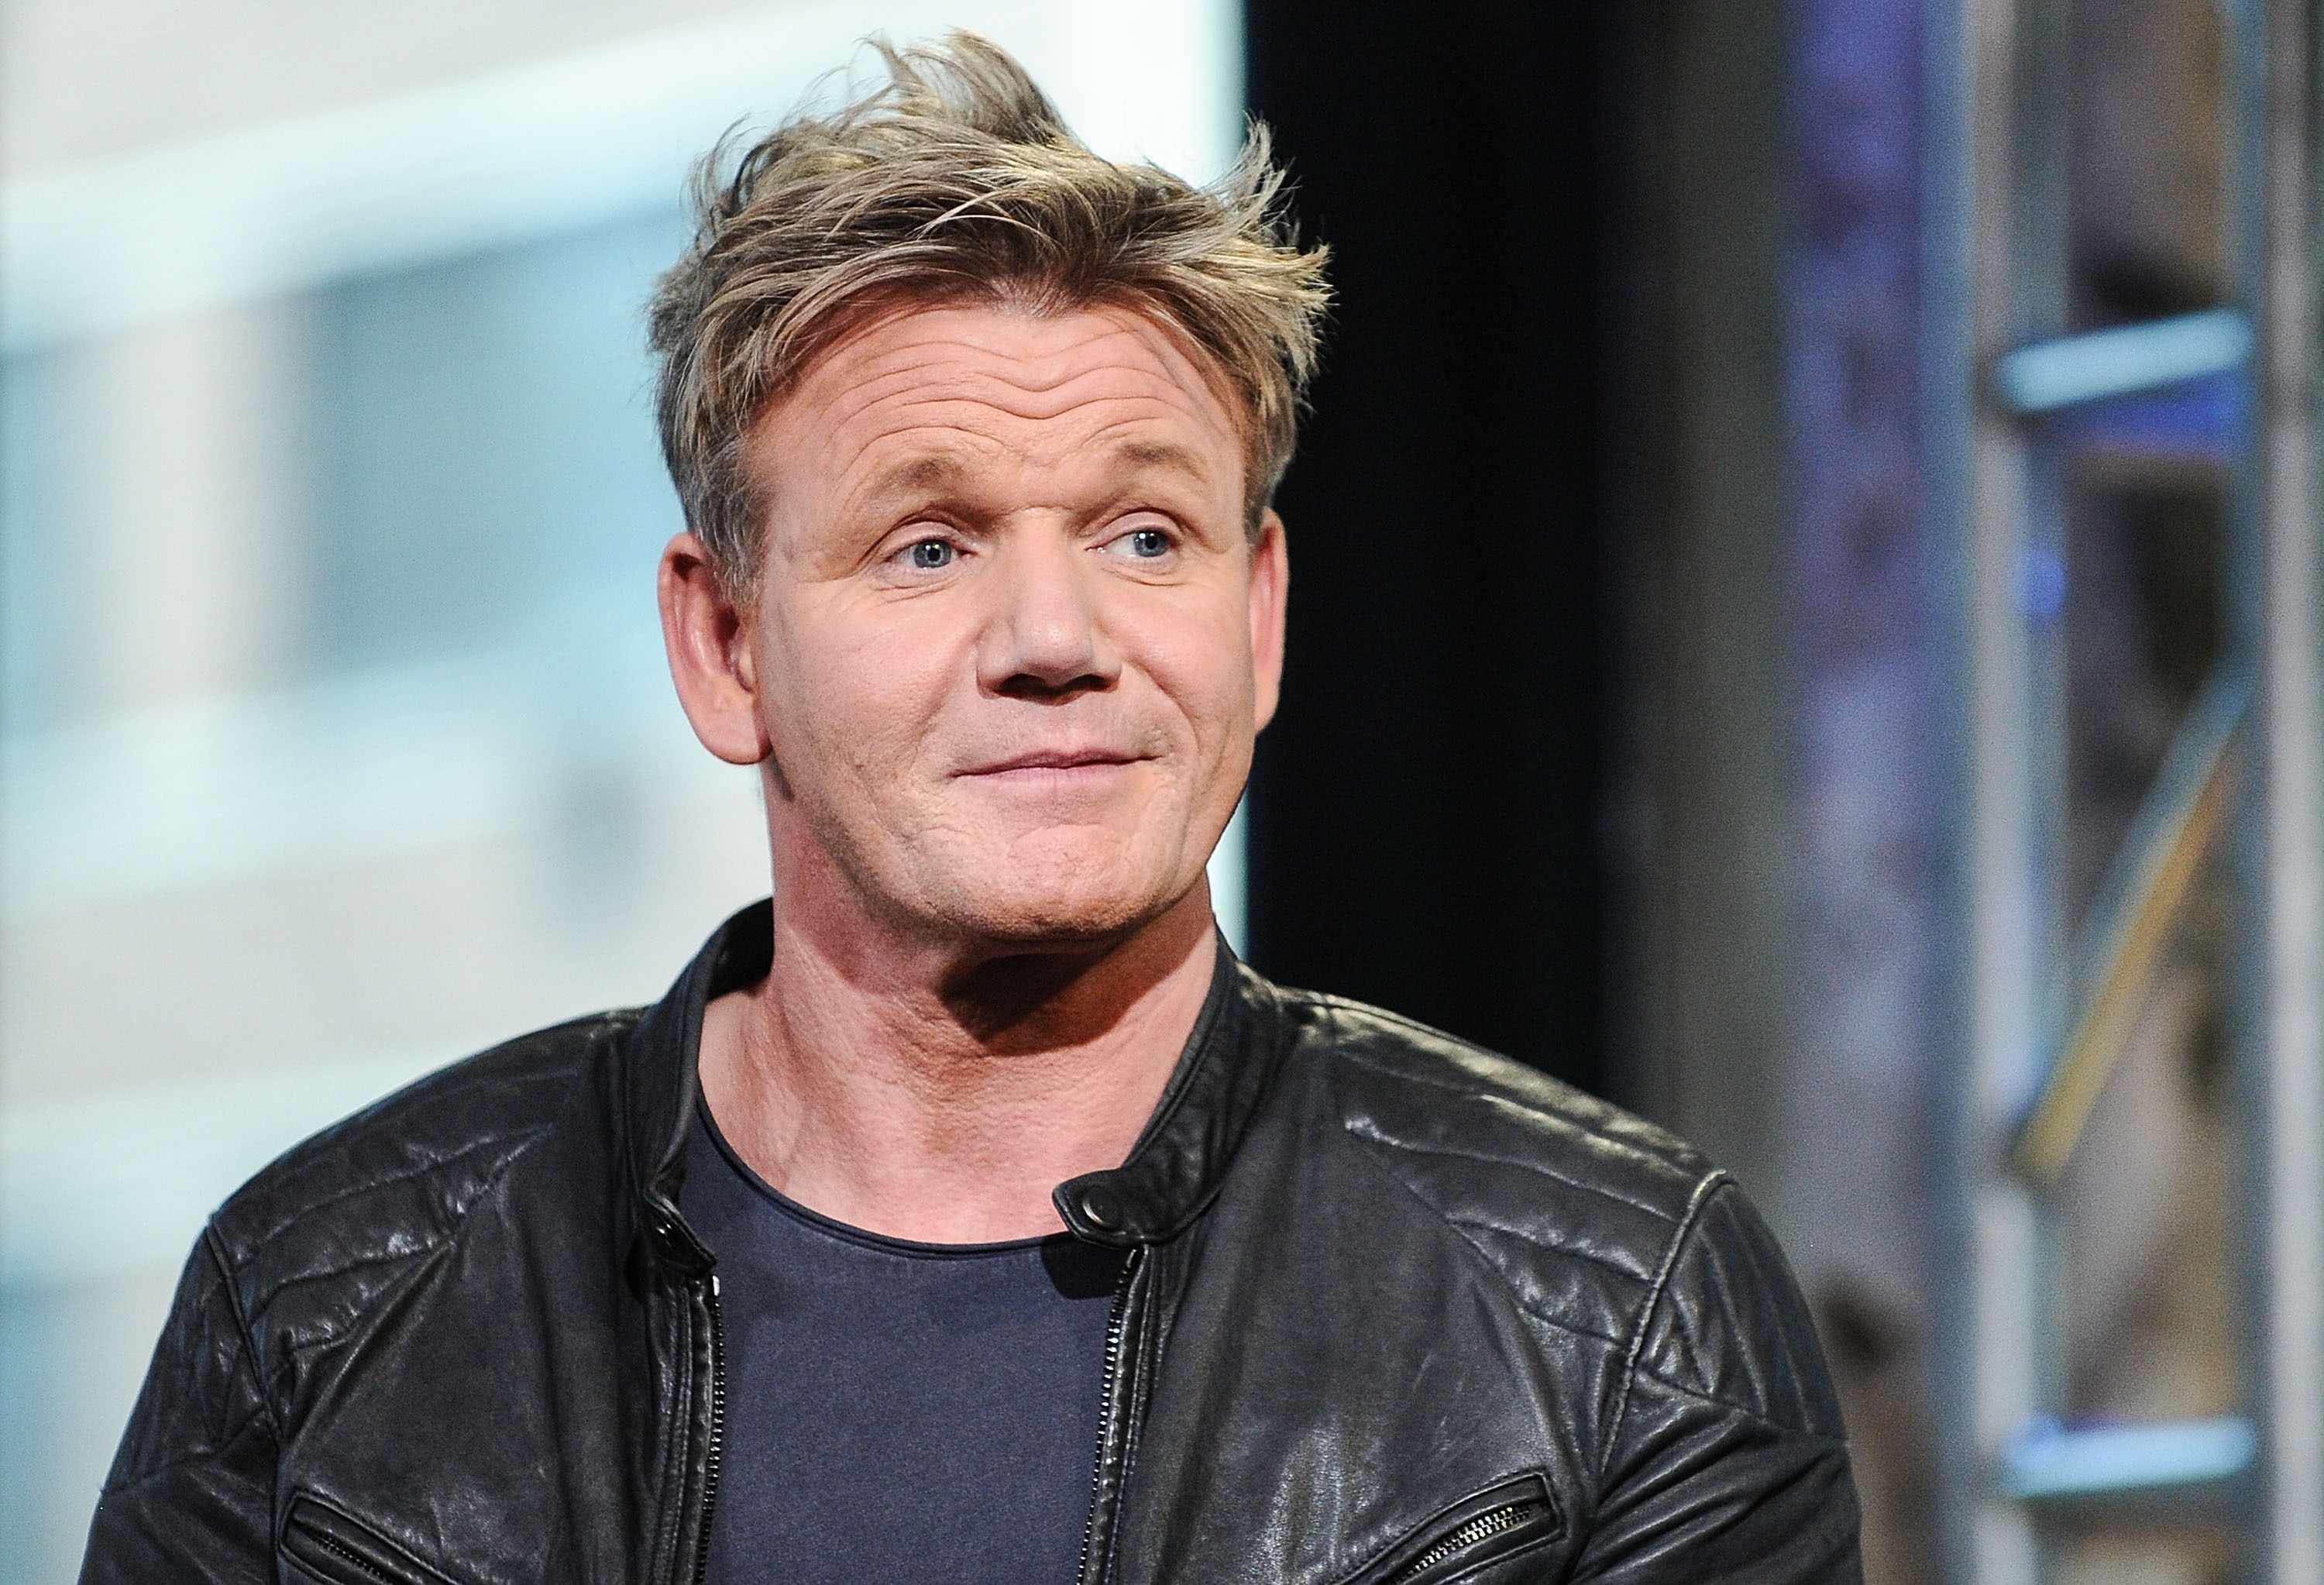 NEW YORK, NY - JUNE 22:  Chef Gordon Ramsay attends AOL Build to discuss his MasterChef Mobile Game at AOL Studios on June 22, 2016 in New York City. (Daniel Zuchnik —WireImage)